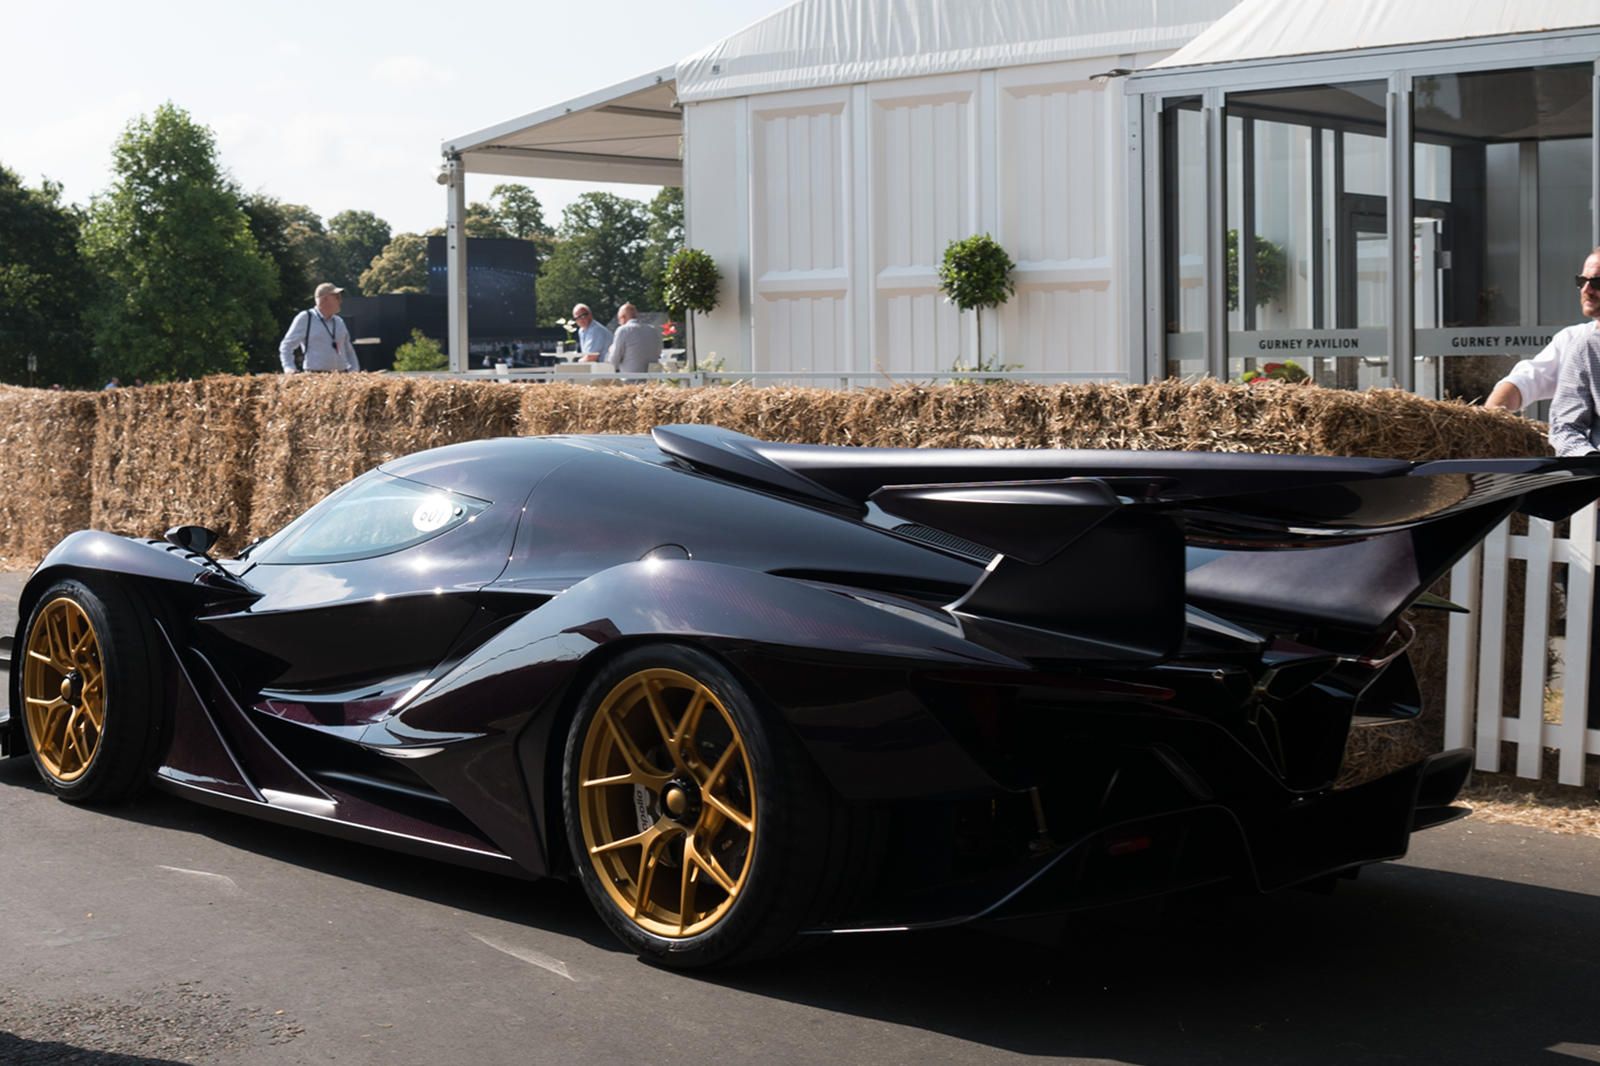 10 Reasons Why We Desperately Want To Drive The Apollo Intensa Emozione